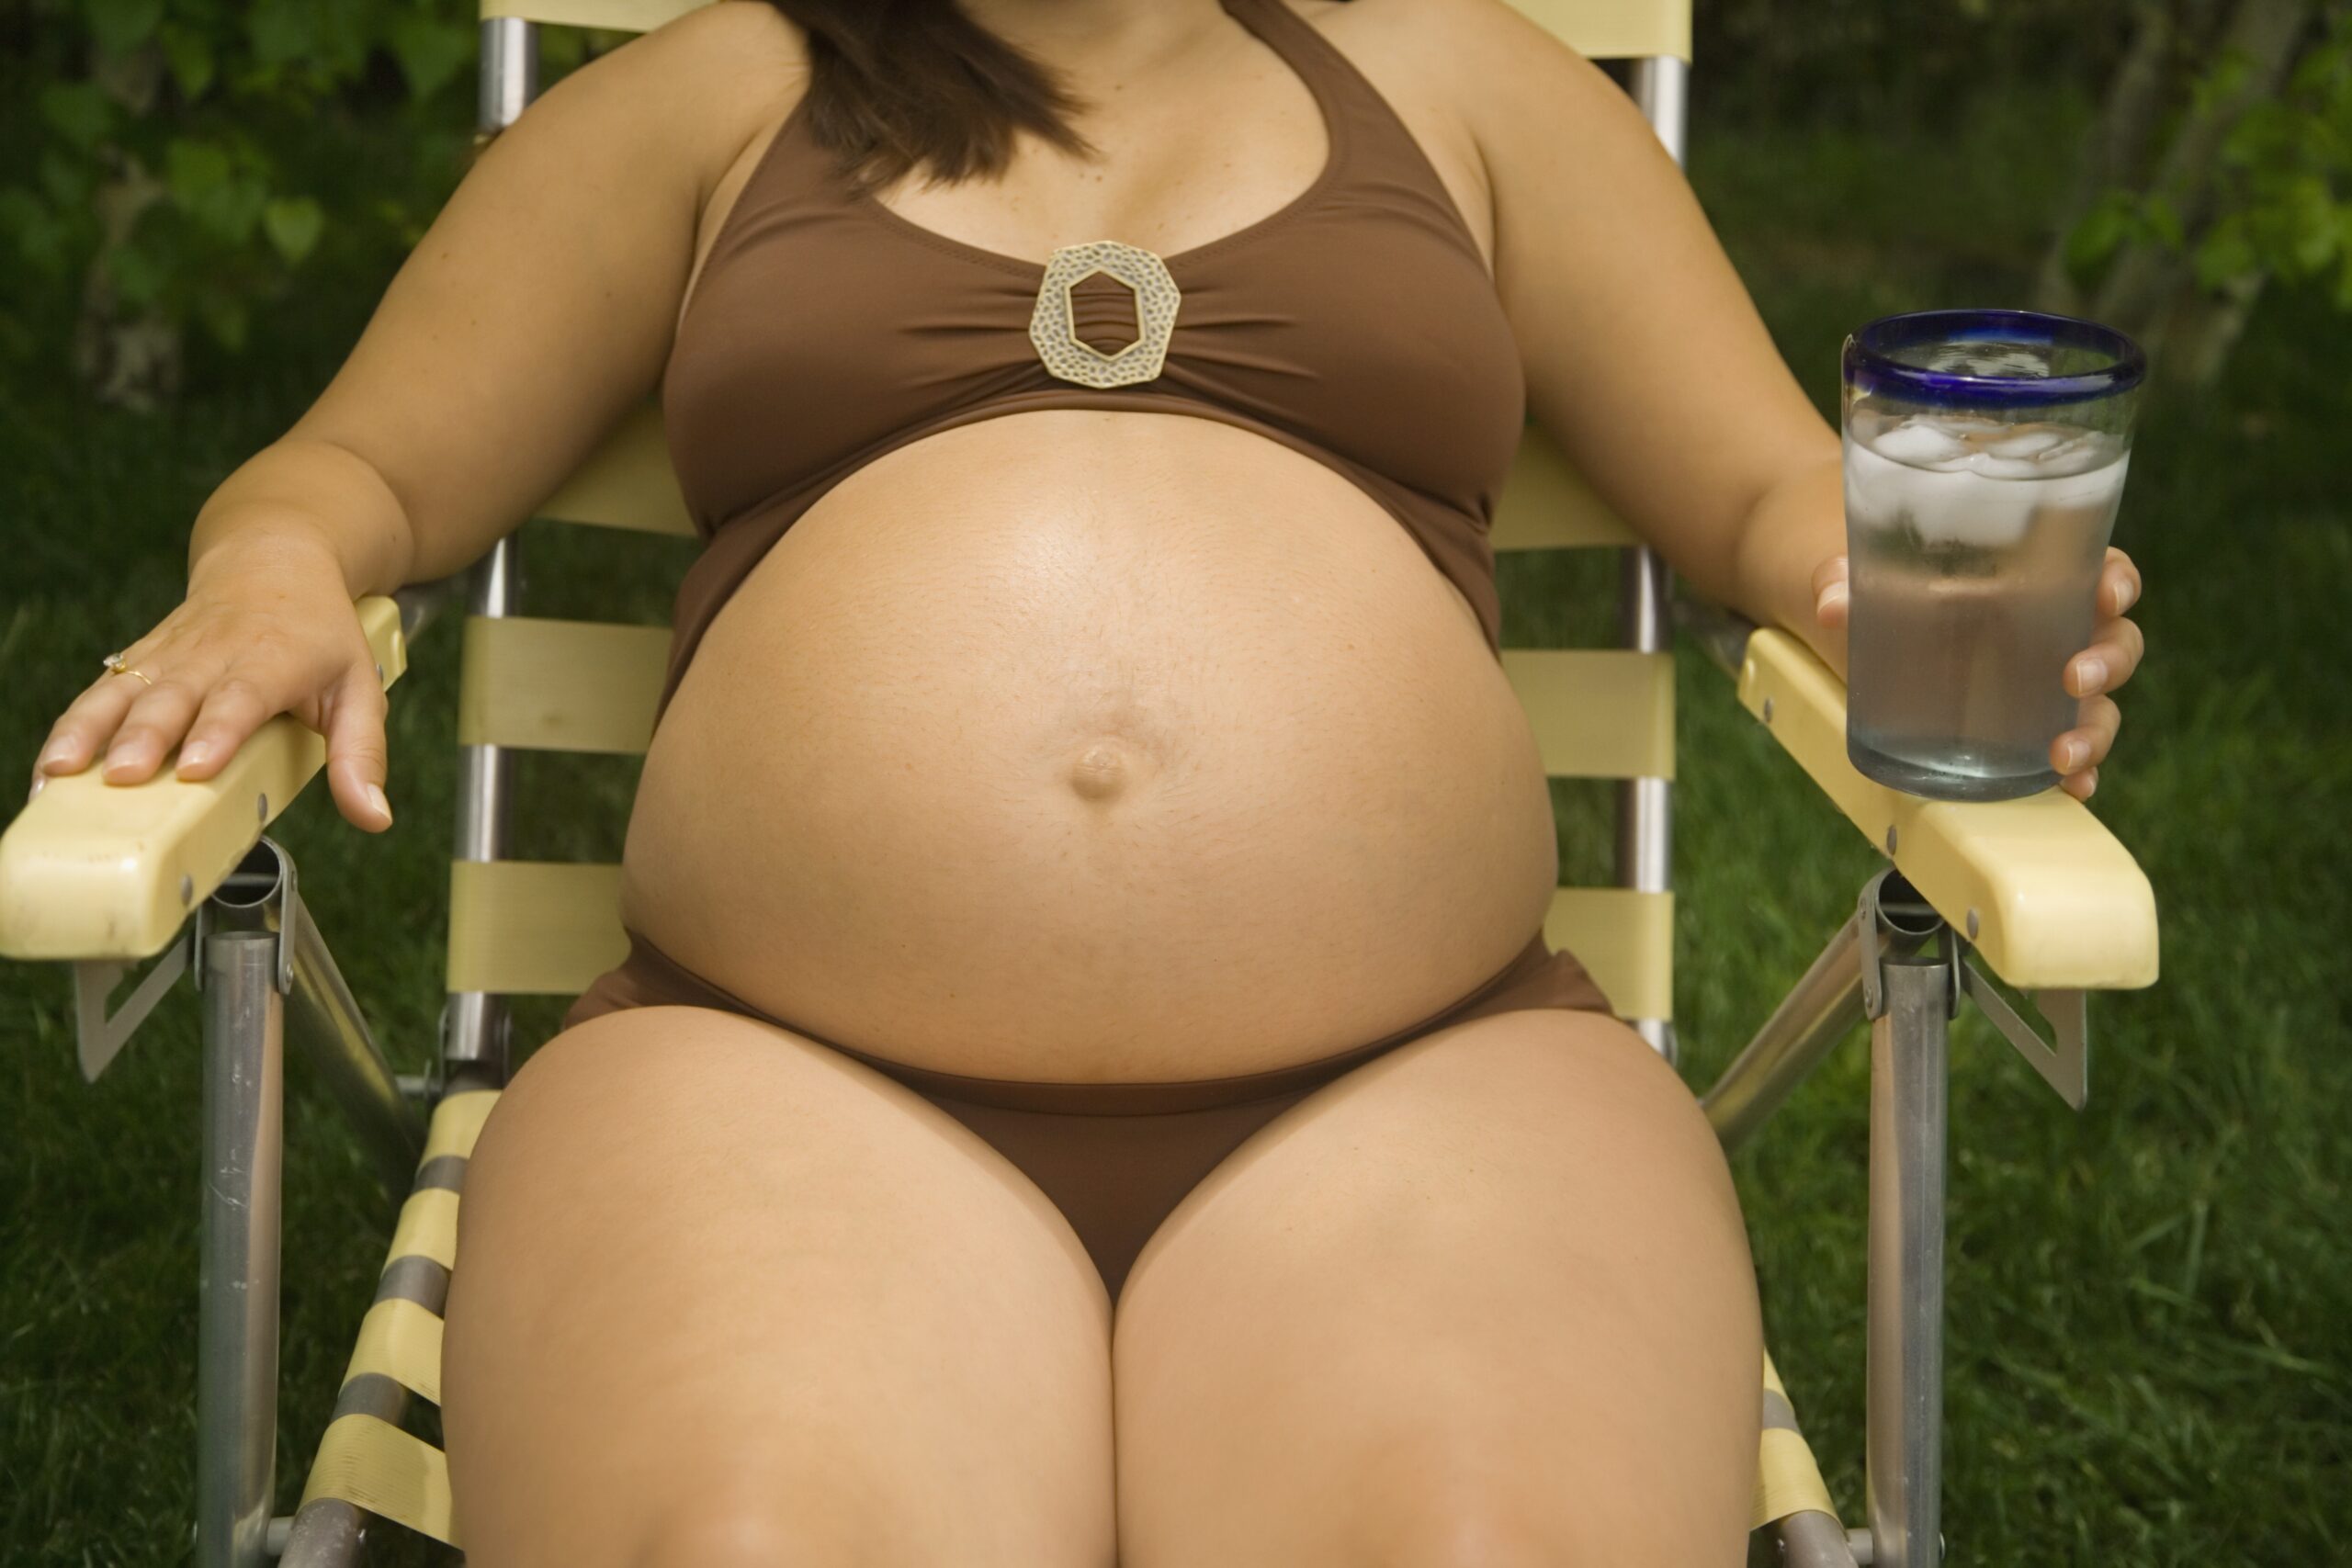 Pregnant woman laying in lawn chair wearing bathing suit